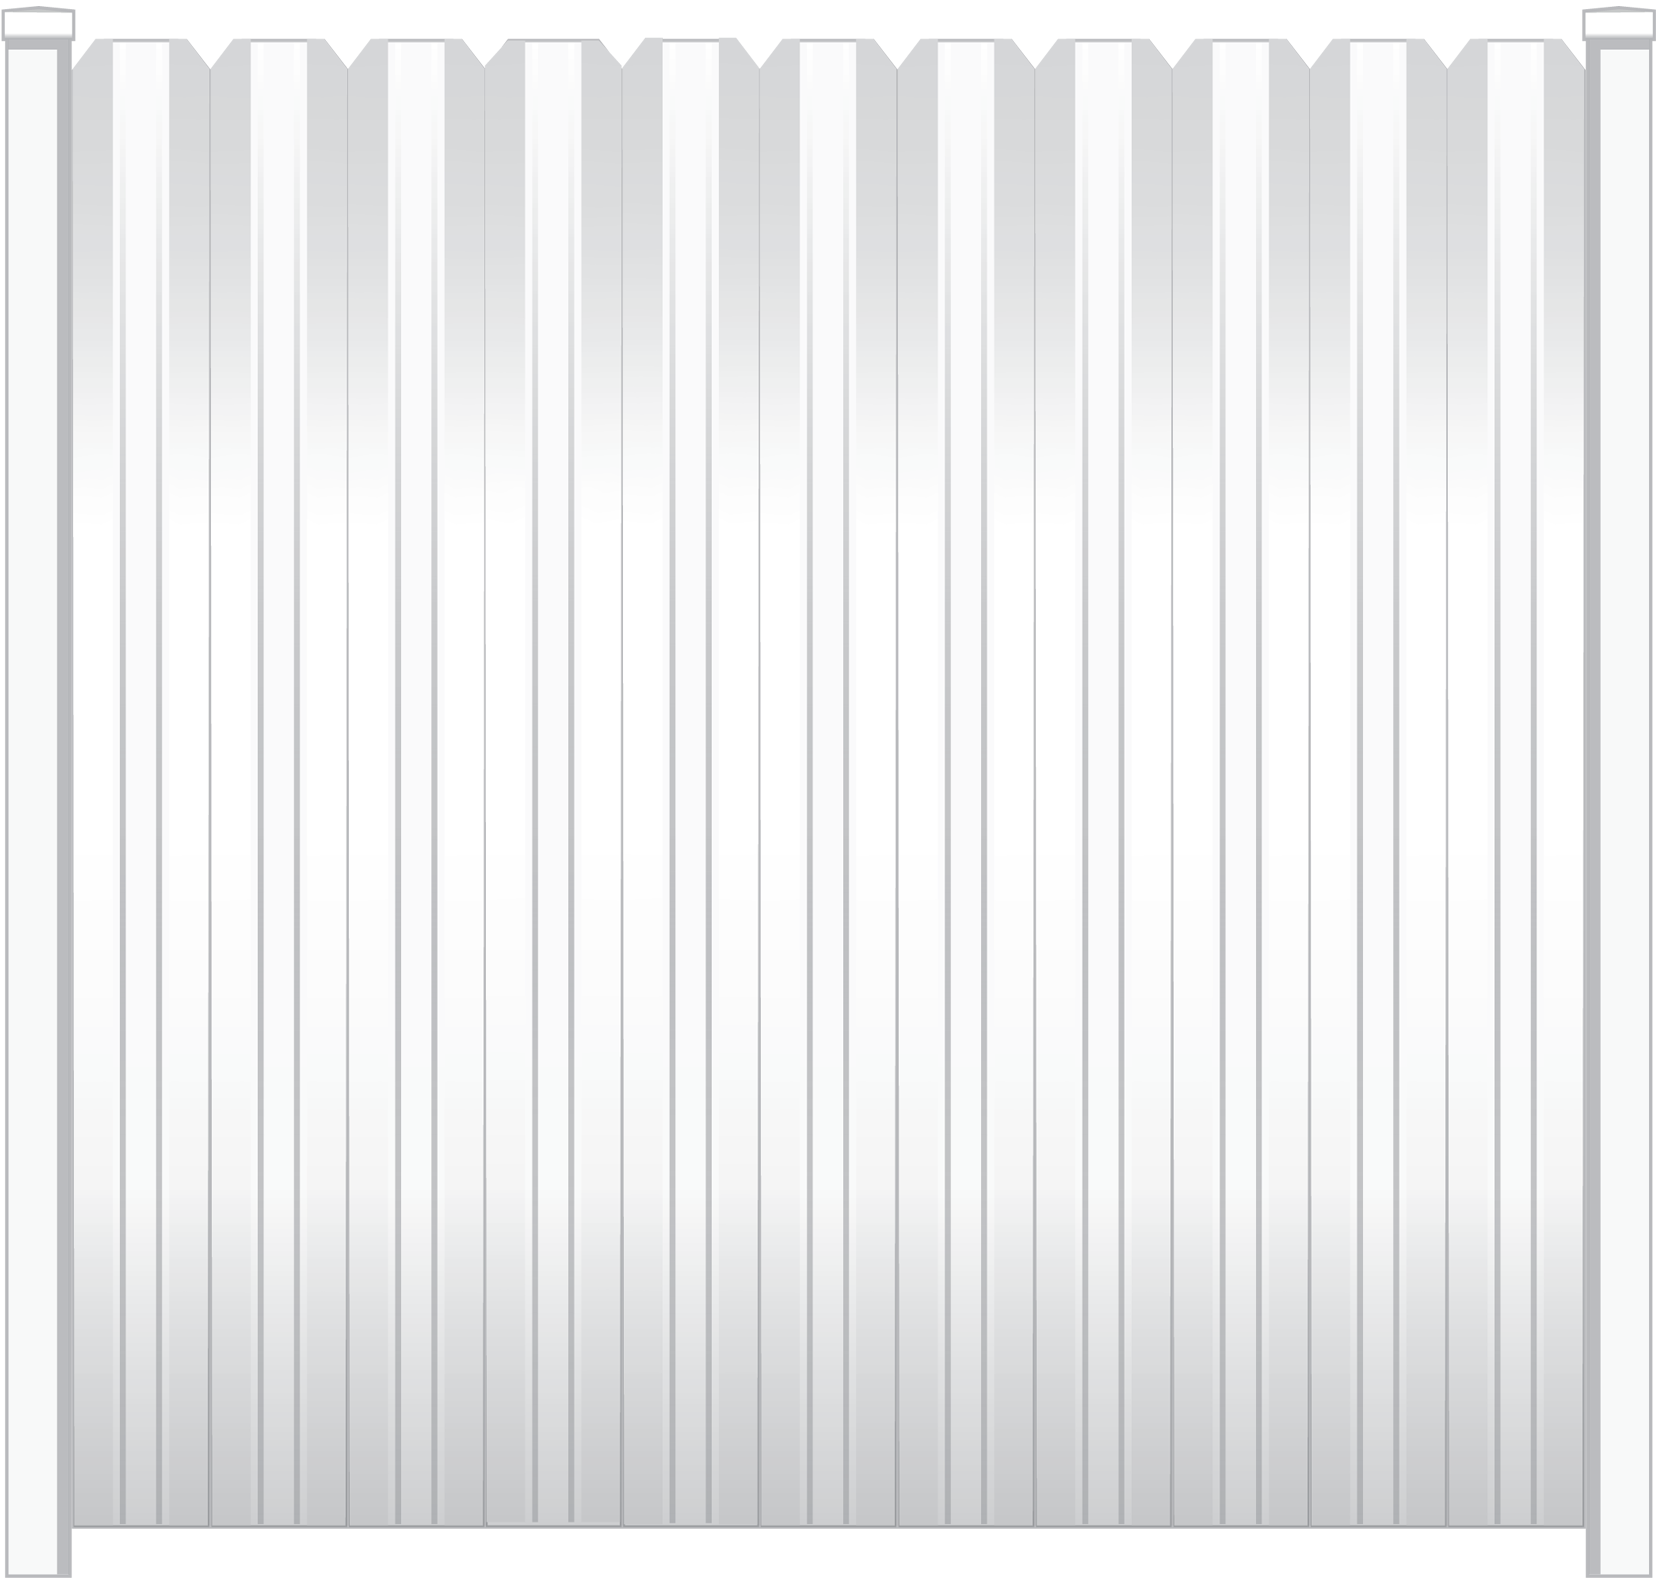 Rendering of a Standard Metal Privacy Fence from Fence Supply Company Serving Southwest Florida, Central Florida, & South Florida